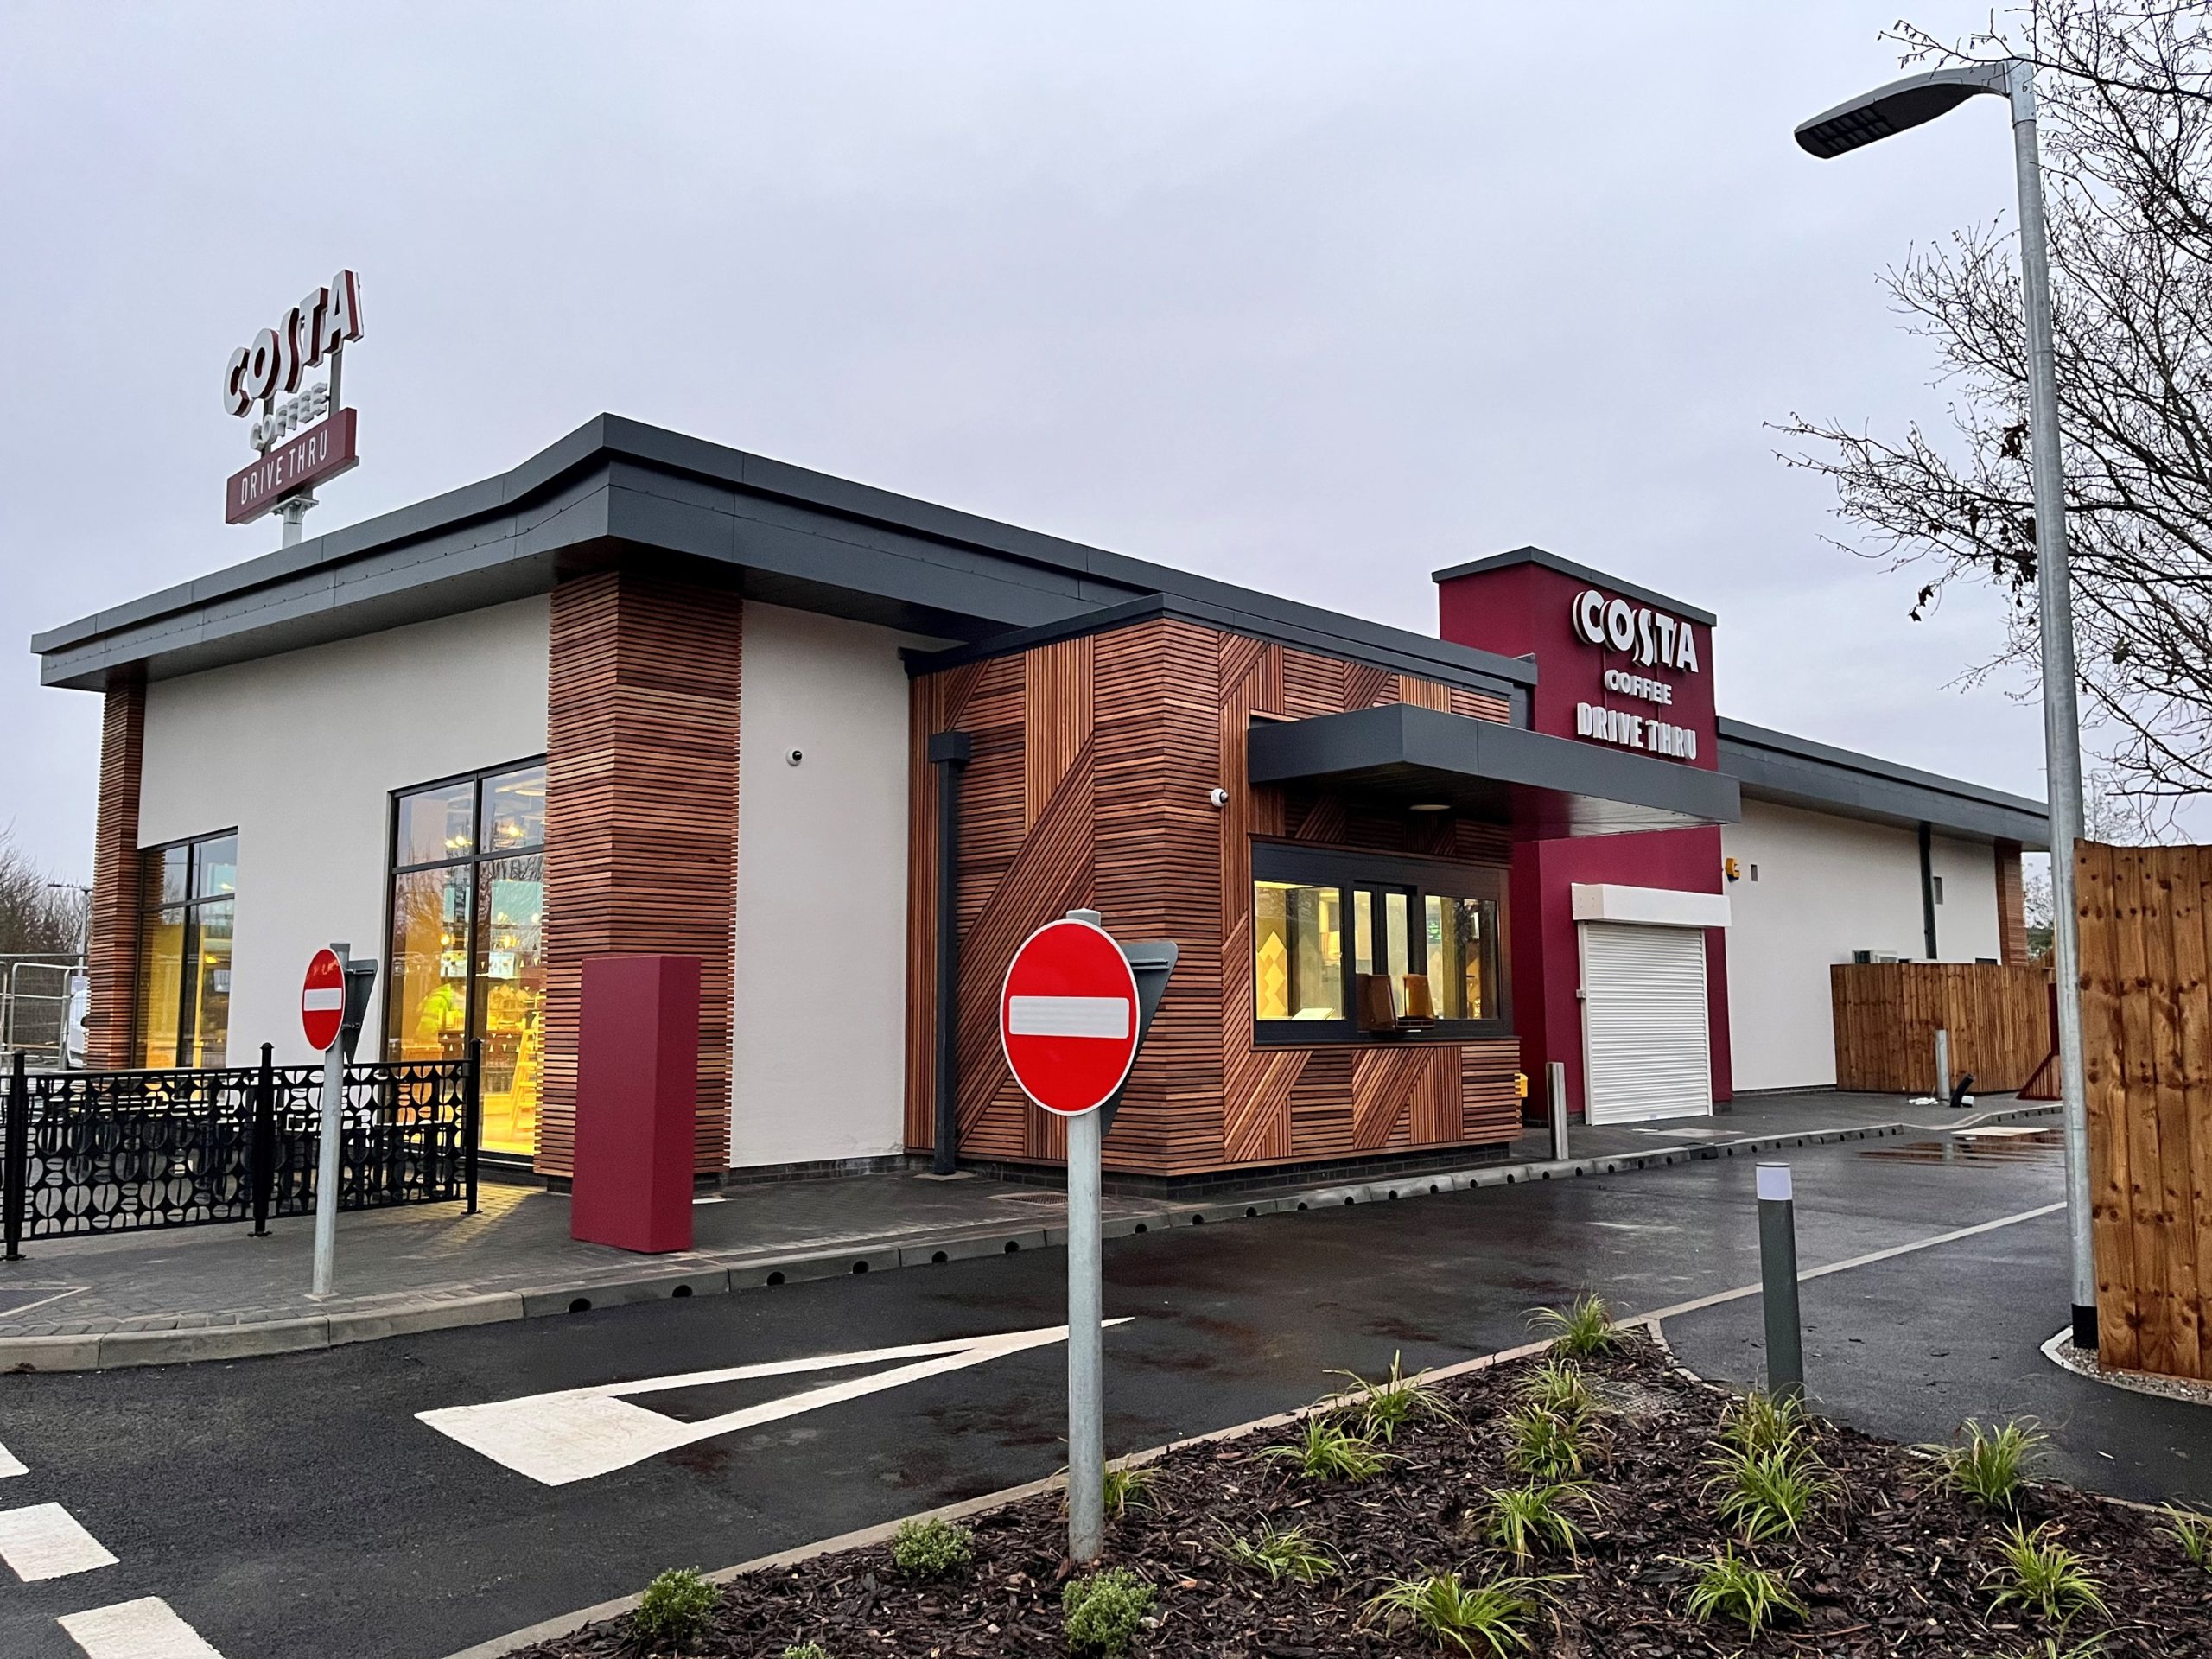 New roadside retail scheme in Stoke-on-Trent features Costa Coffee and Greggs